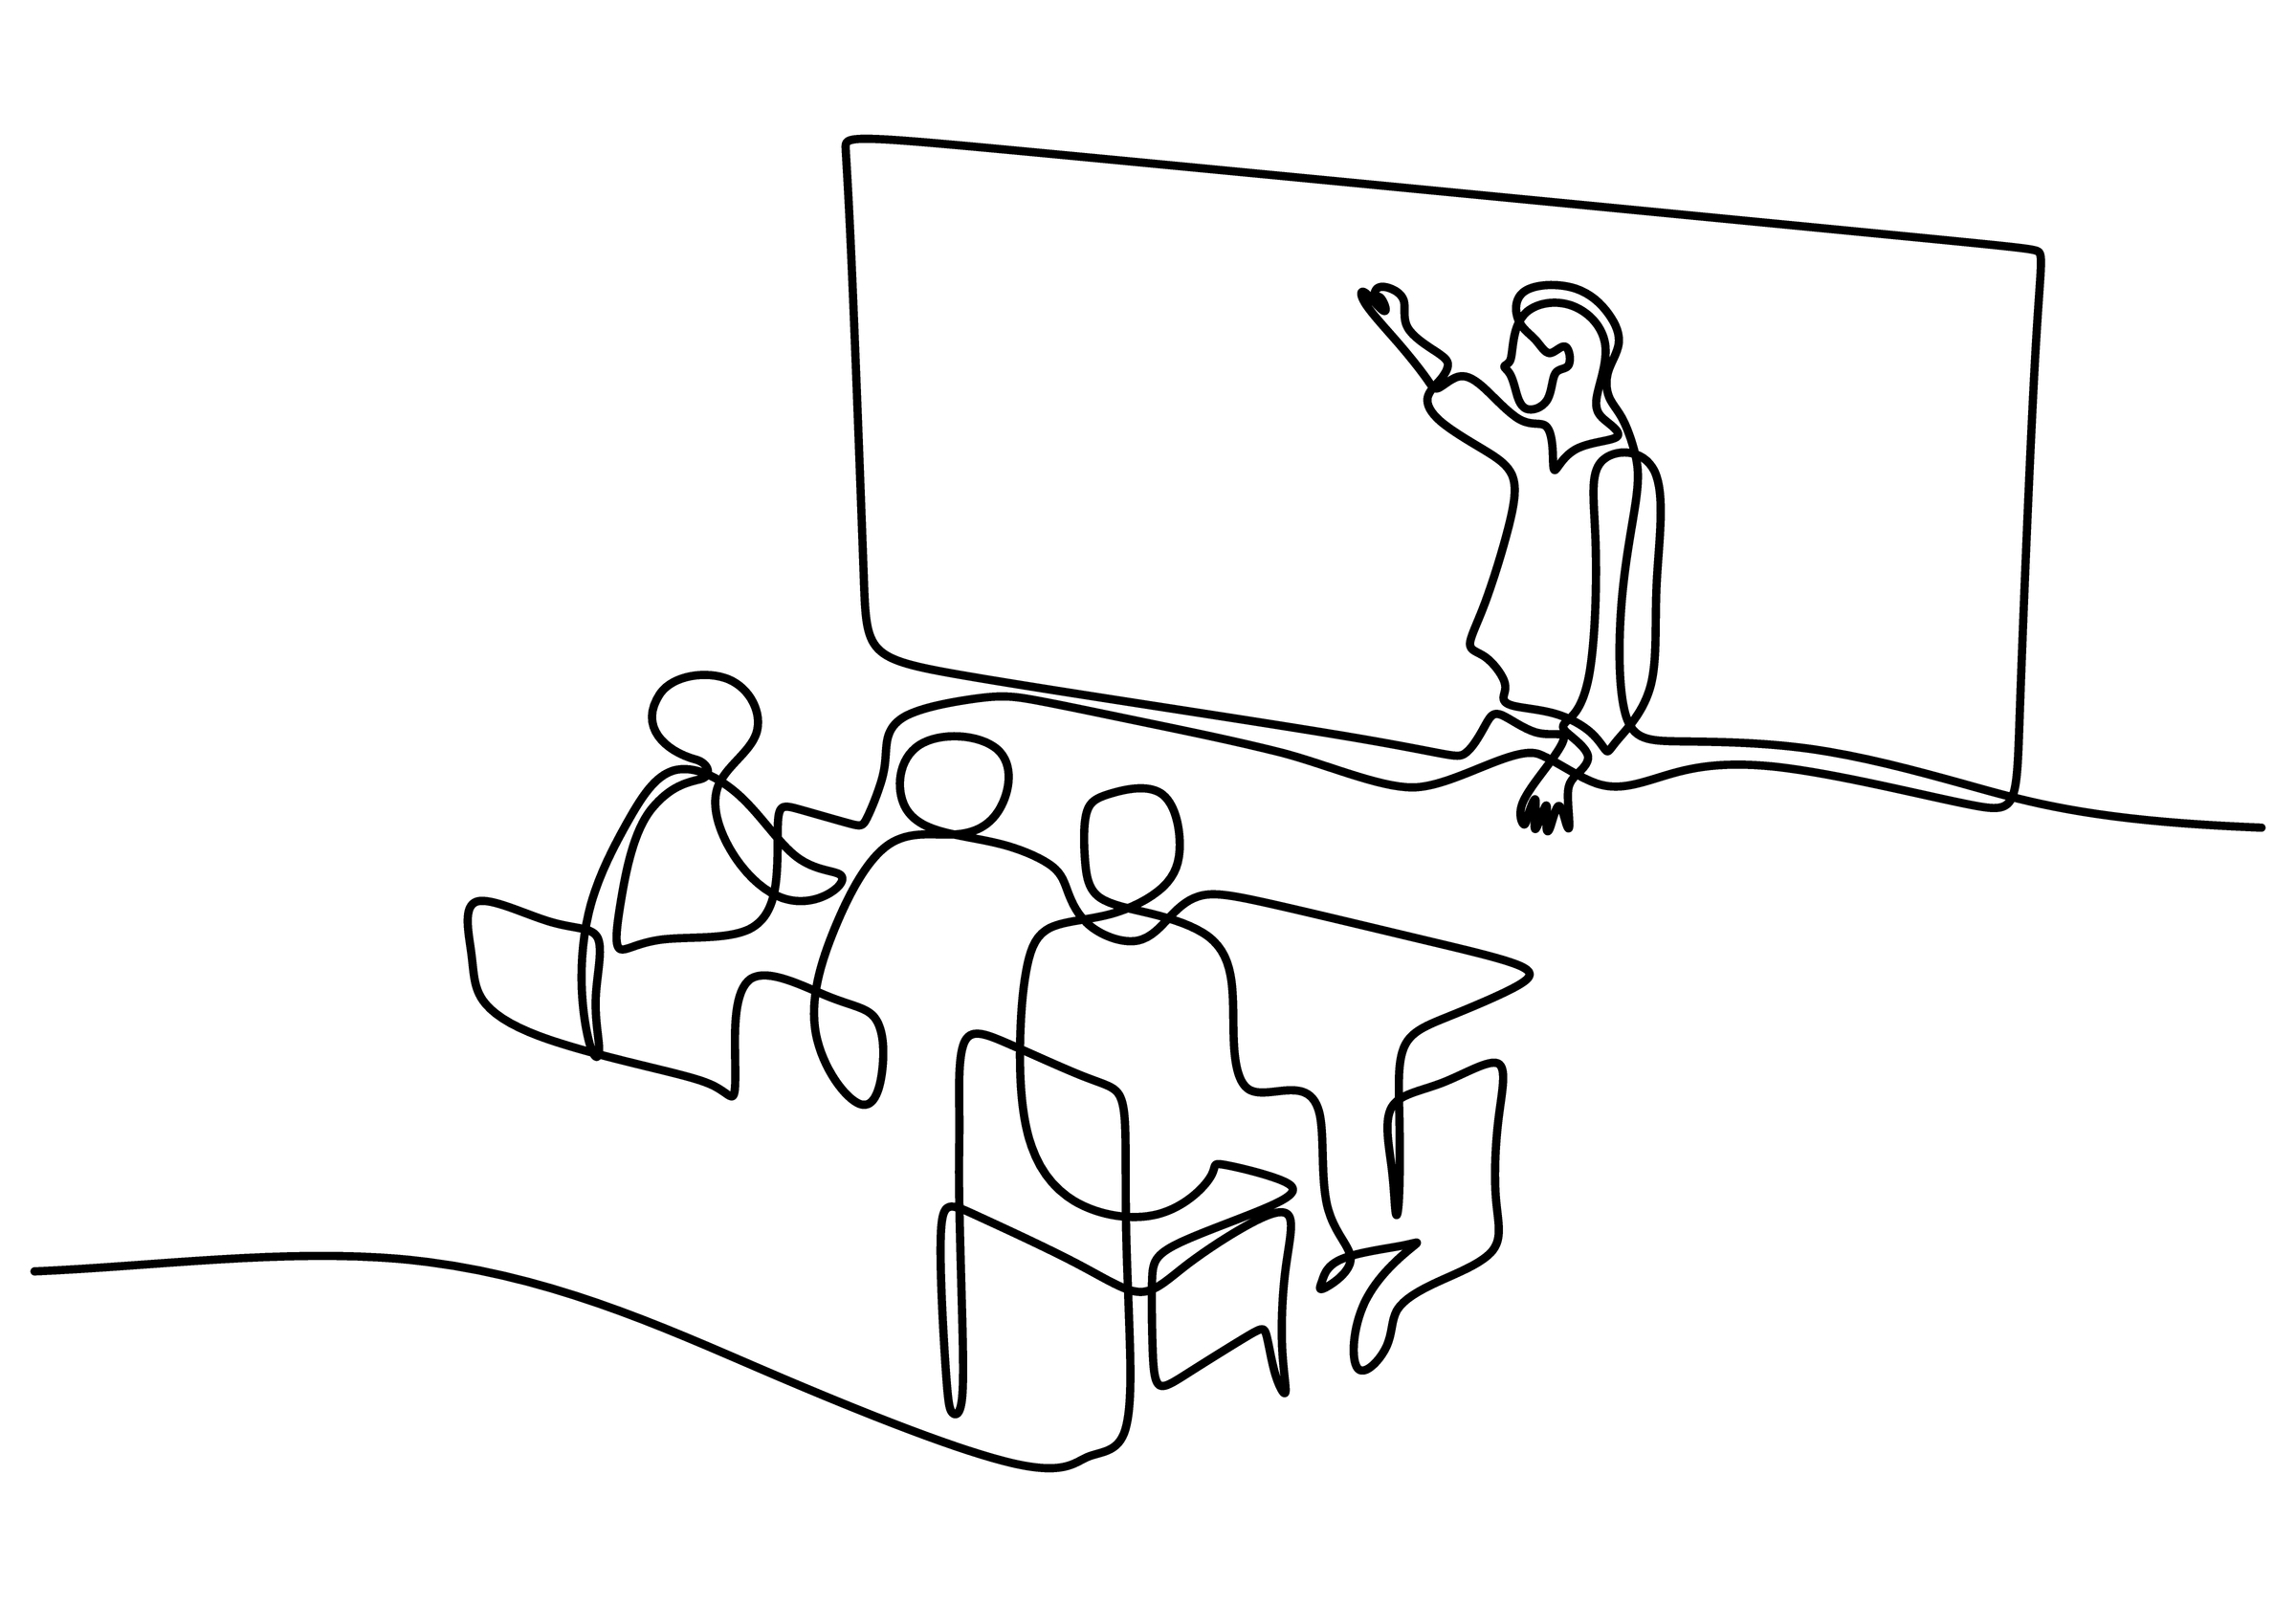 Continuous,One,Line,Drawing,Of,A,Teacher,Explaining,Student,At